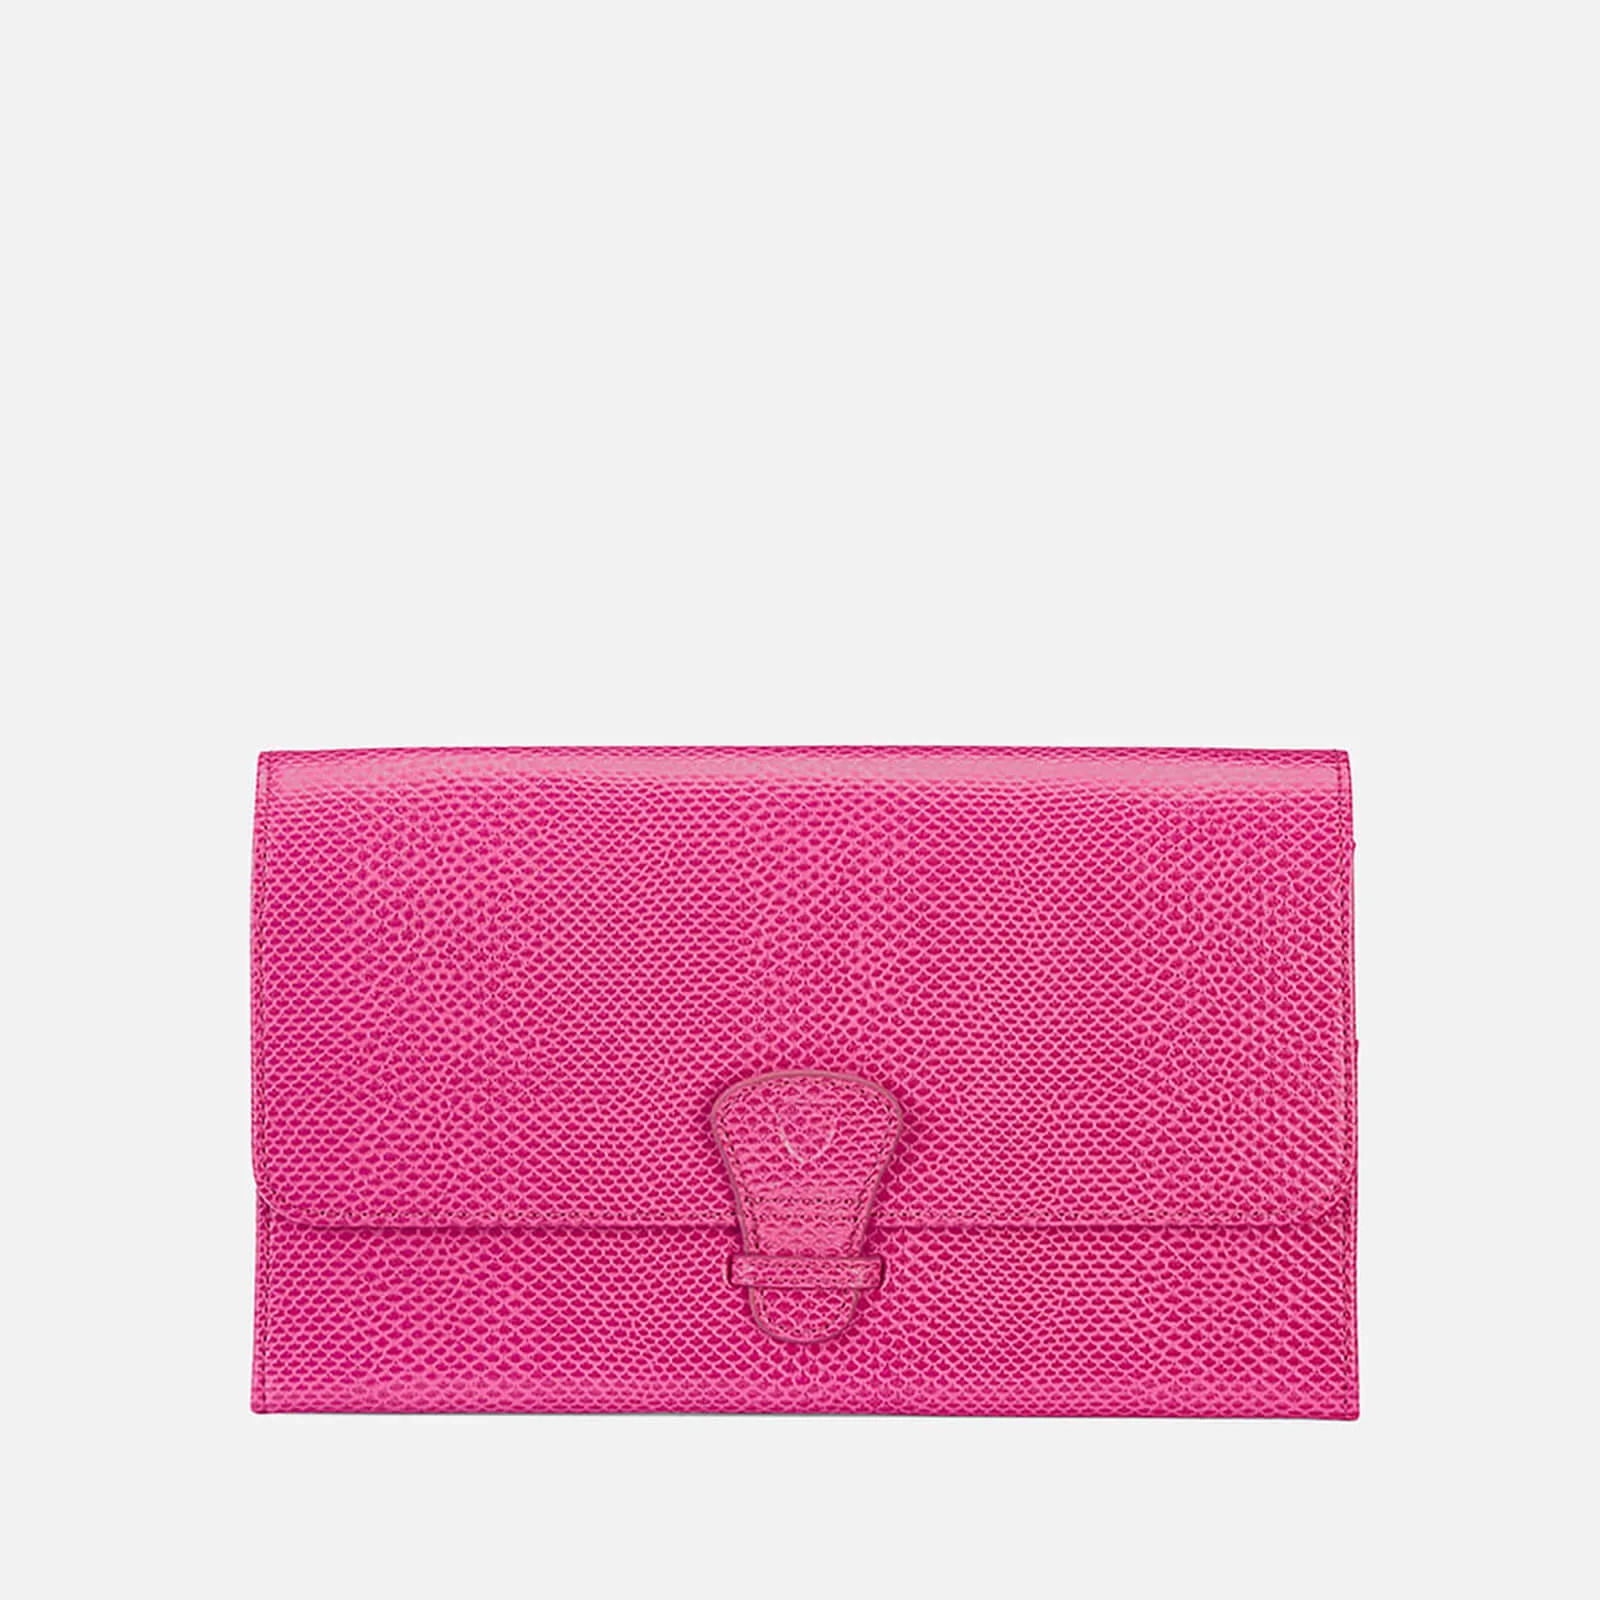 Aspinal of London Women's Classic Travel Wallet - Raspberry Image 1